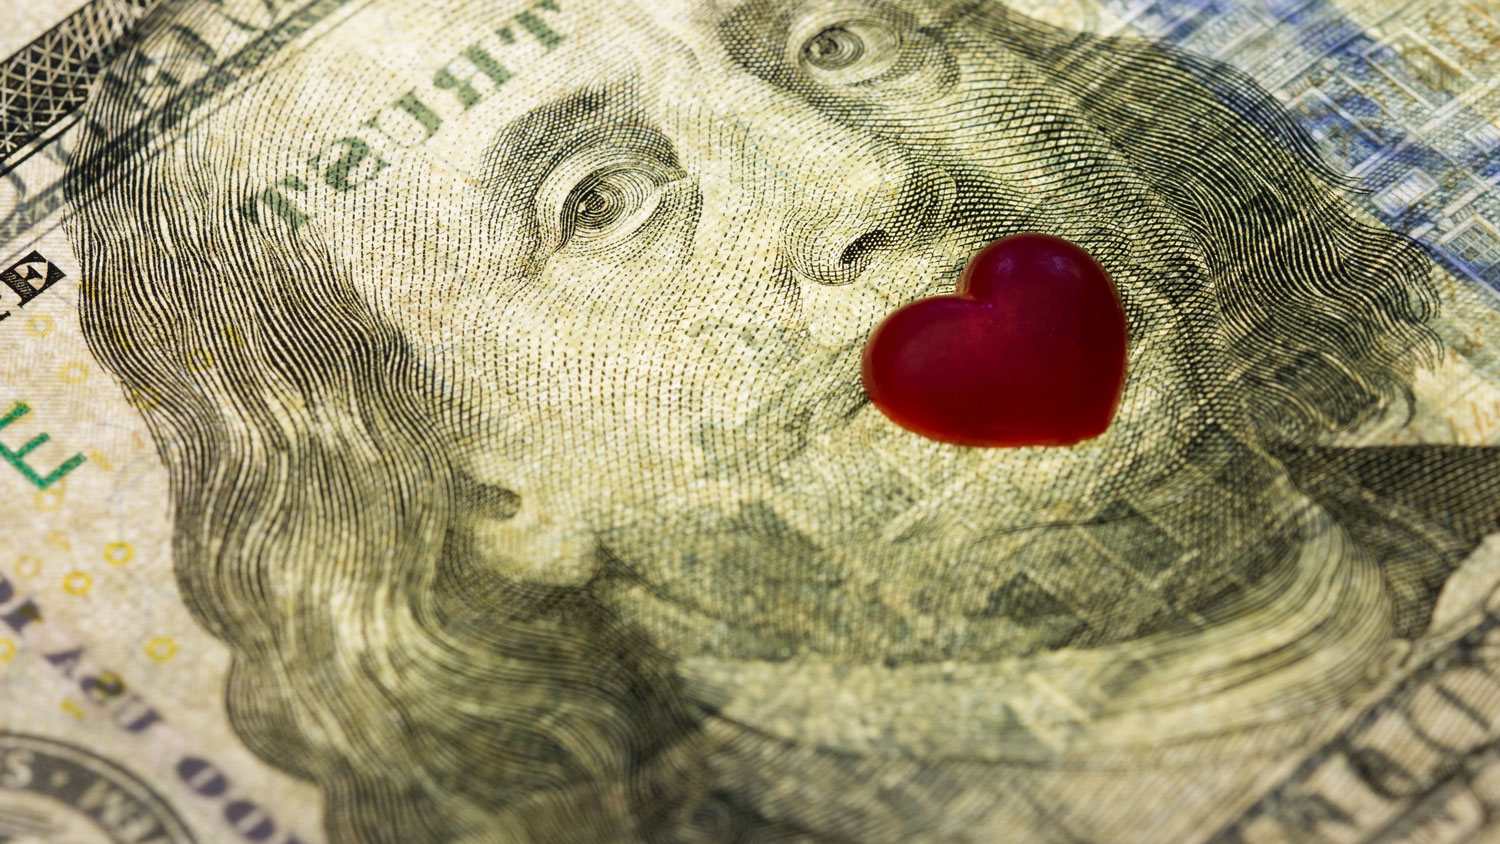 Financial communication represented by Image of US $100 note with heart over Ben Franklin's mouth